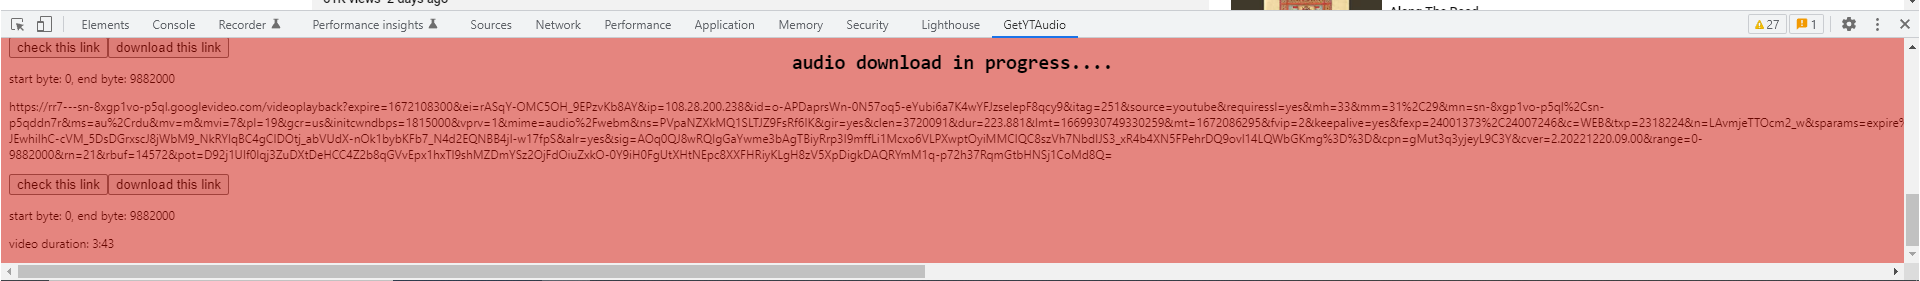 current look of the extension when downloading audio